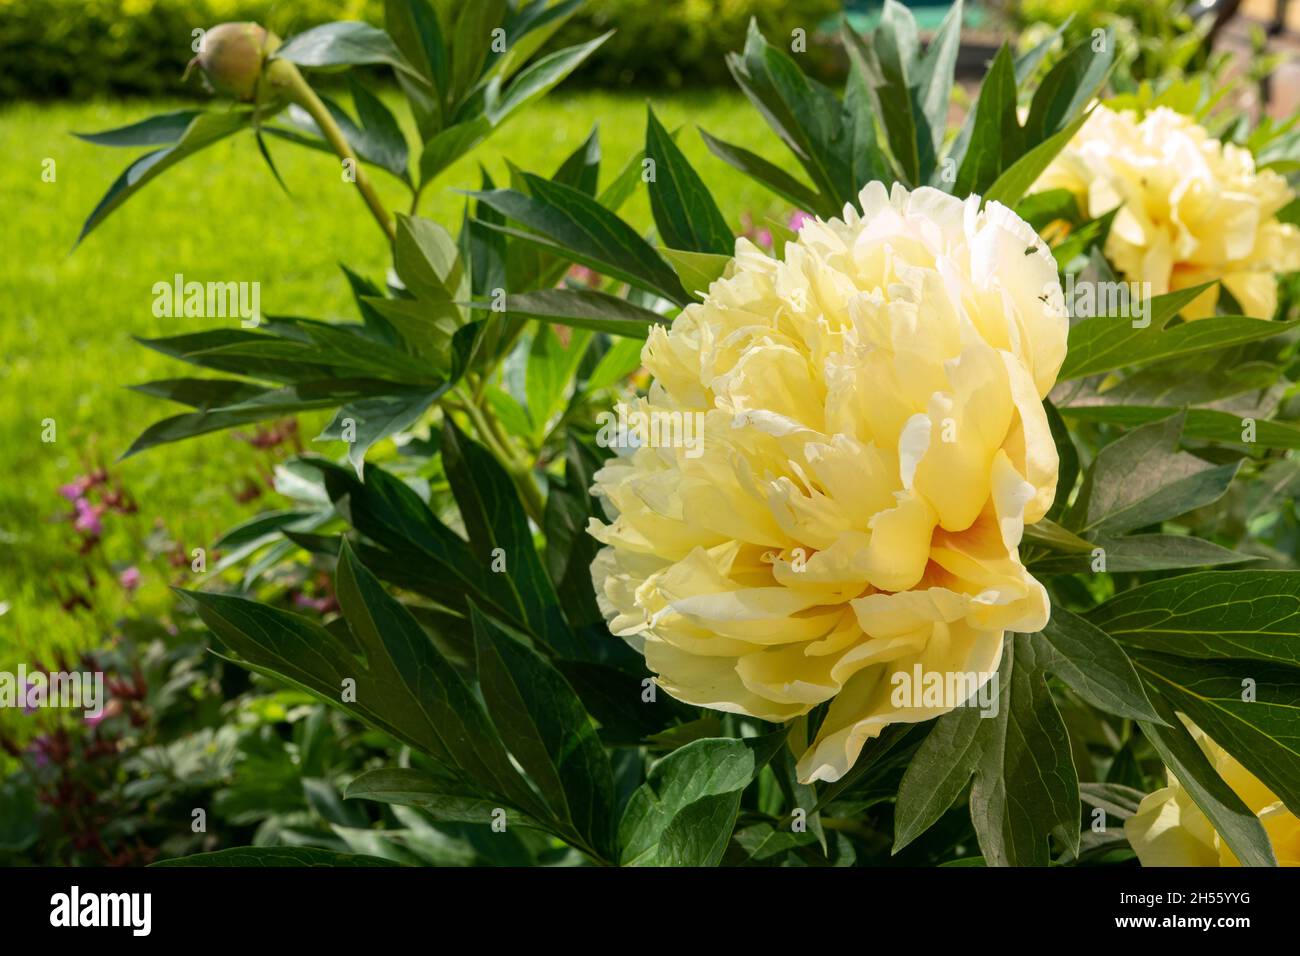 Yellow peony flower in garden. Bartzella Itoh Peony bloom in Park. Large, luminous, golden yellow double bloom. Mother s Day card with yellow rose in Stock Photo